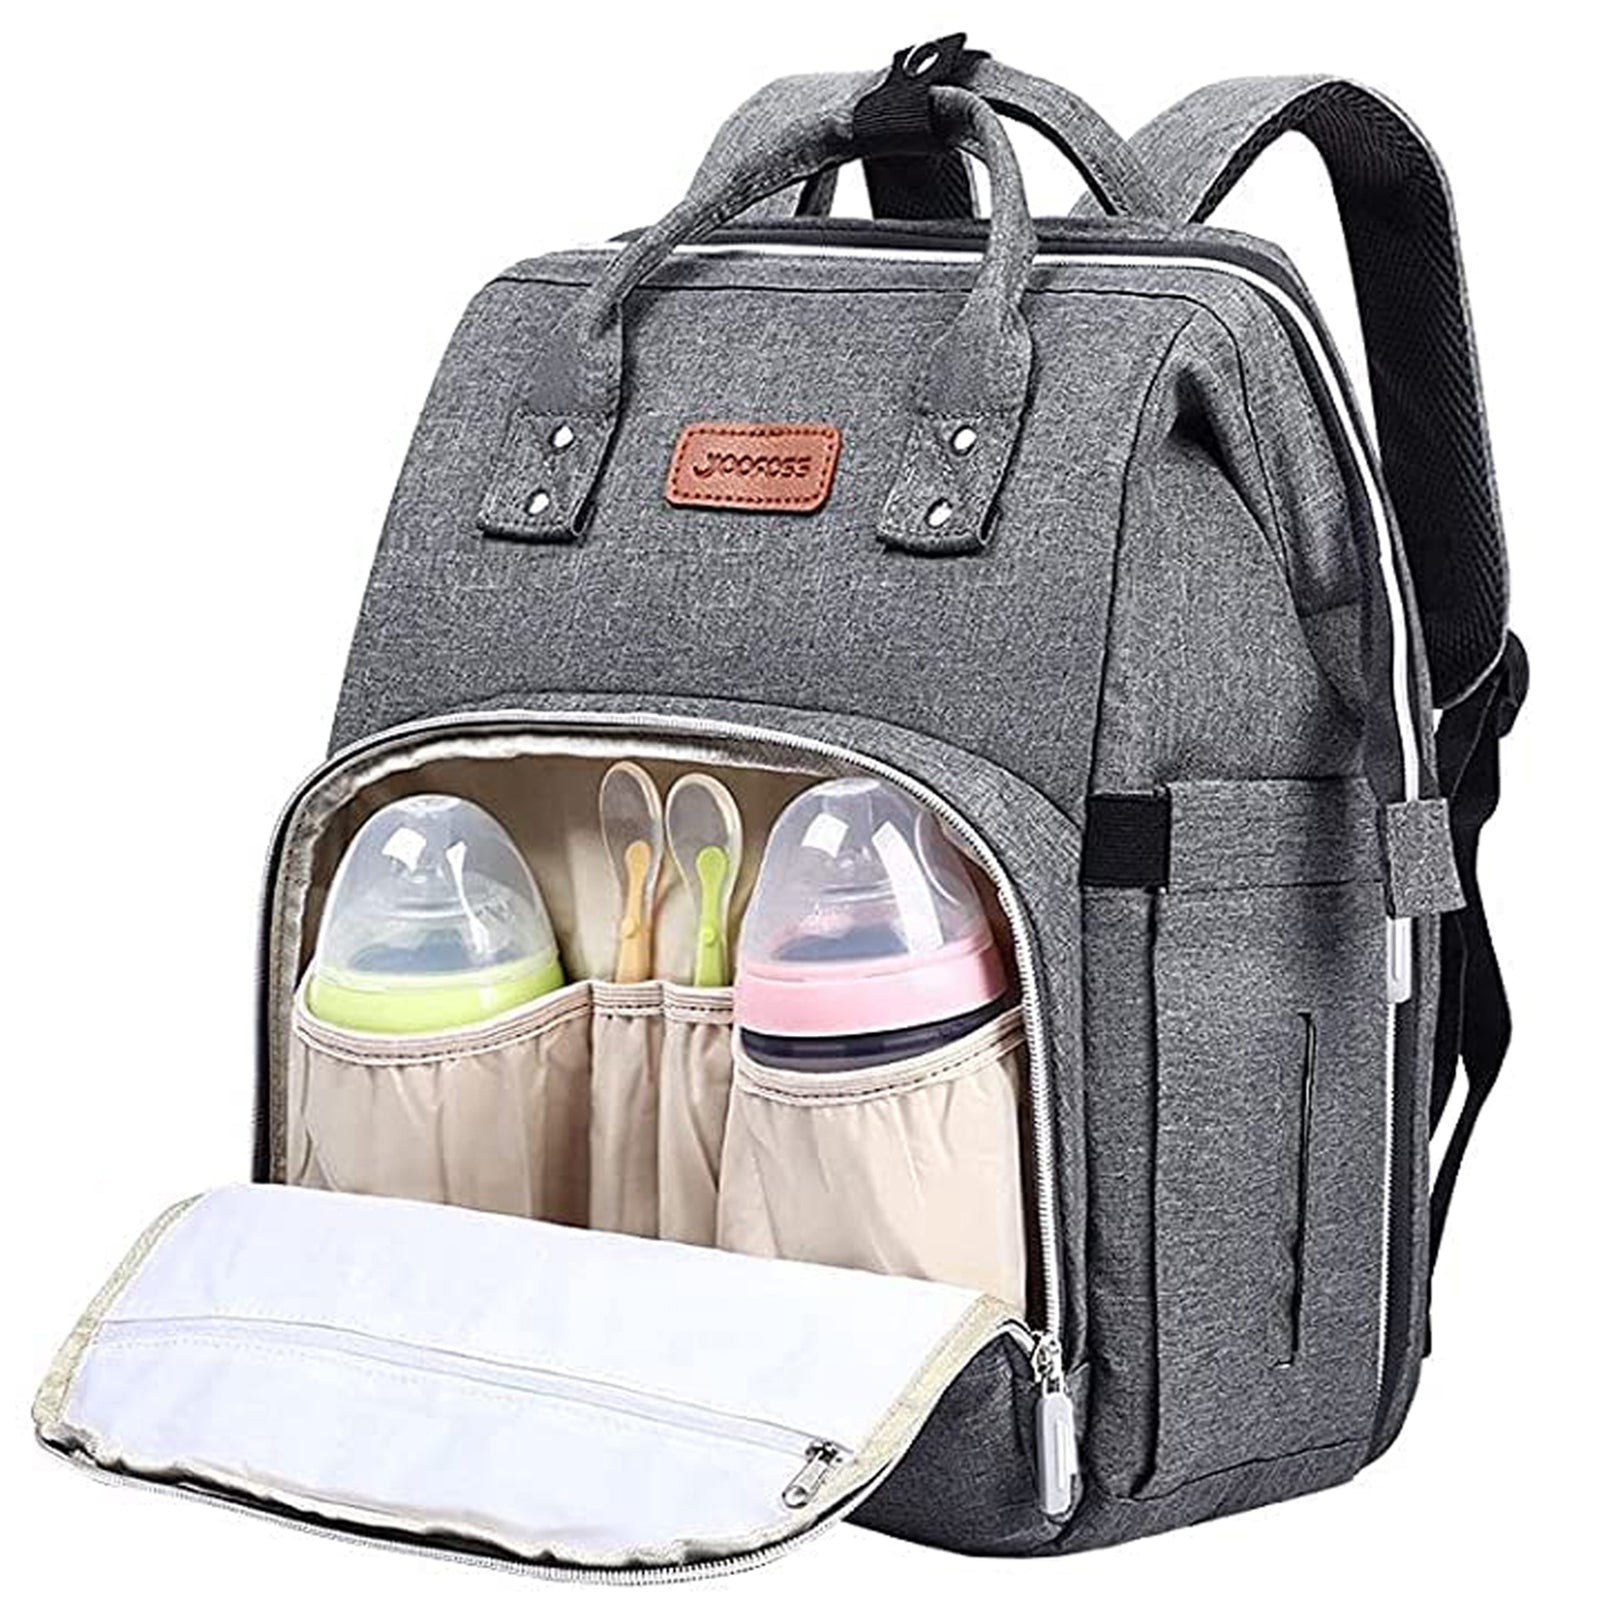 YOOFOSS Diaper Bag Backpack, Baby Nappy Changing Bags Multifunction Tr ...